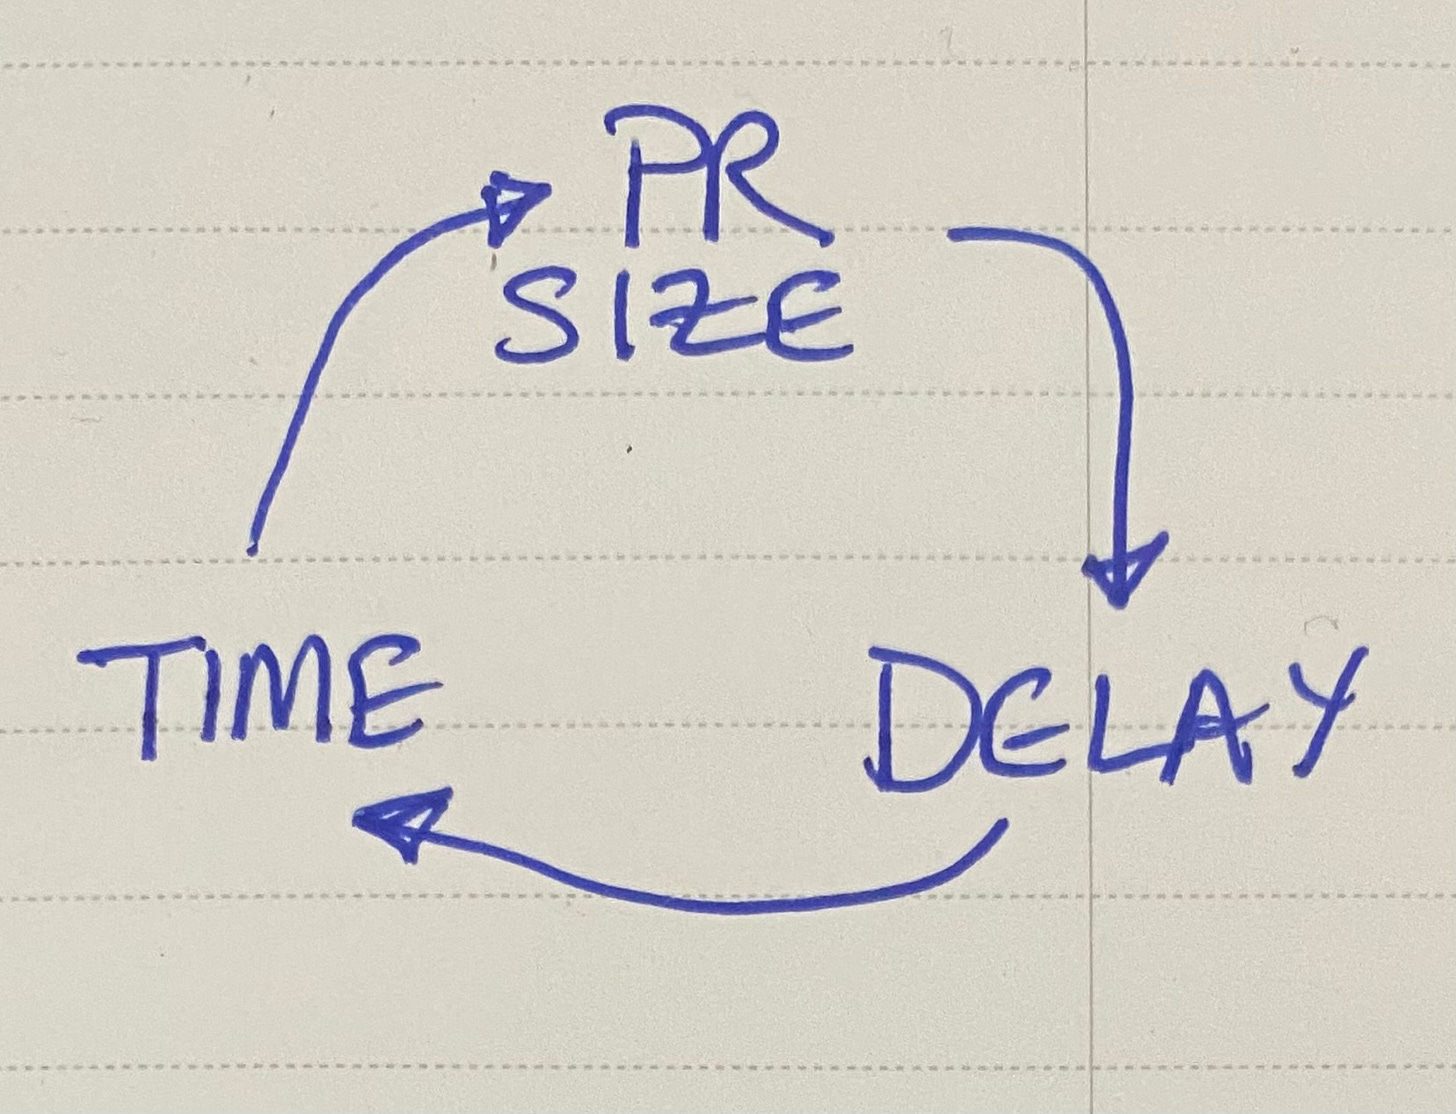 Larger PR size leads to longer delays leads to more time to make changes leads to larger PR size.